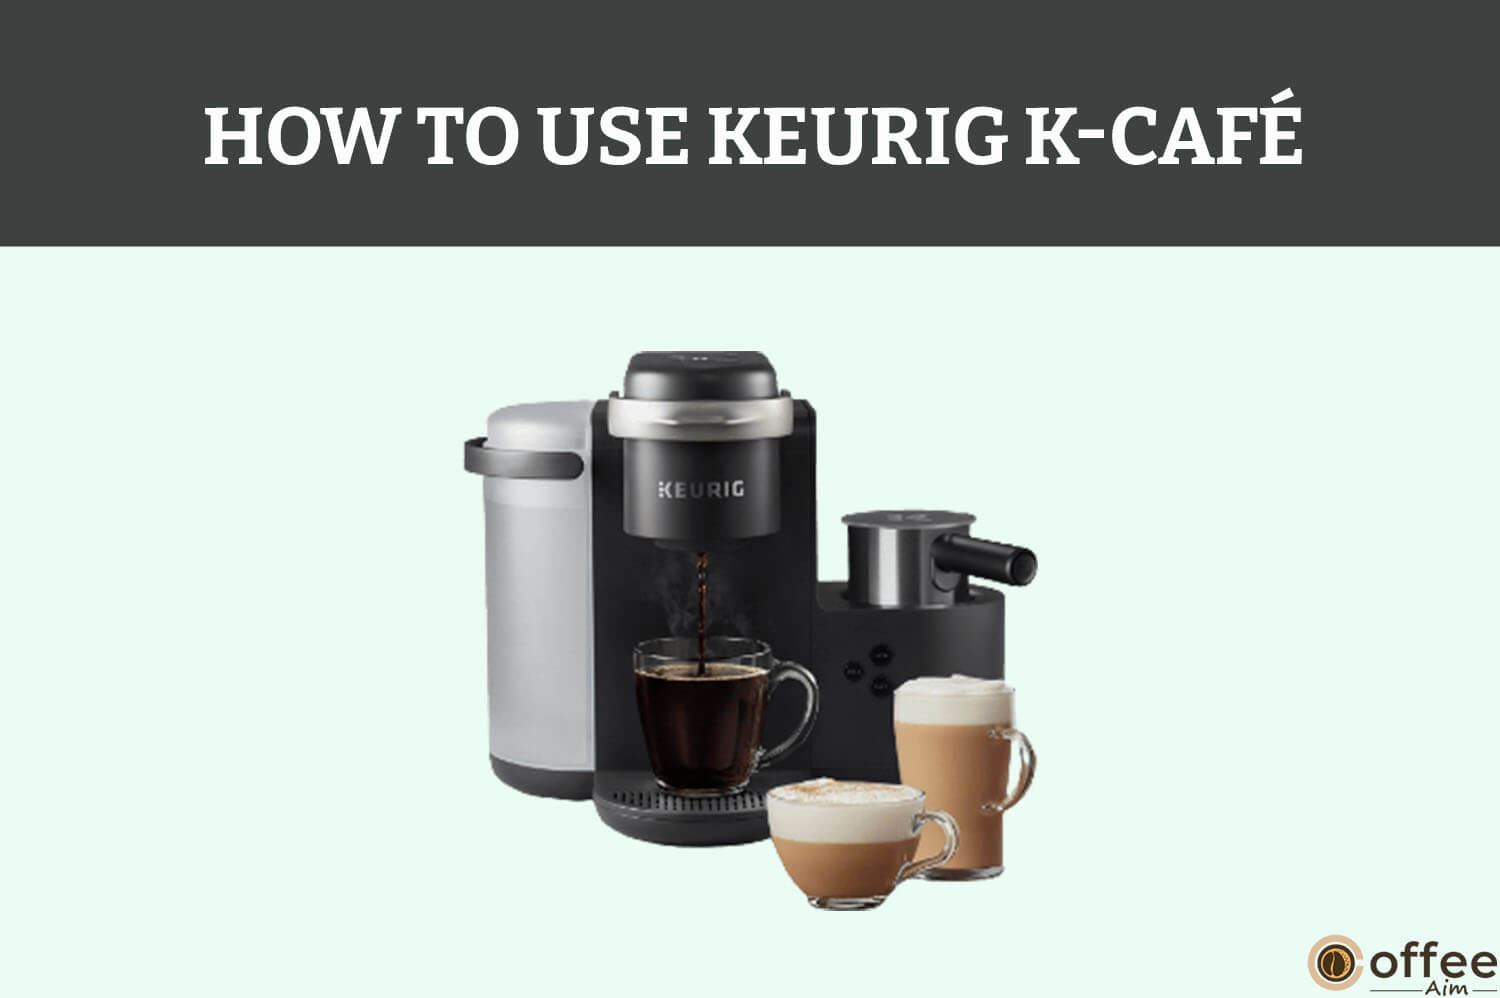 Featured image for the article "How To Use Keurig K-Café"